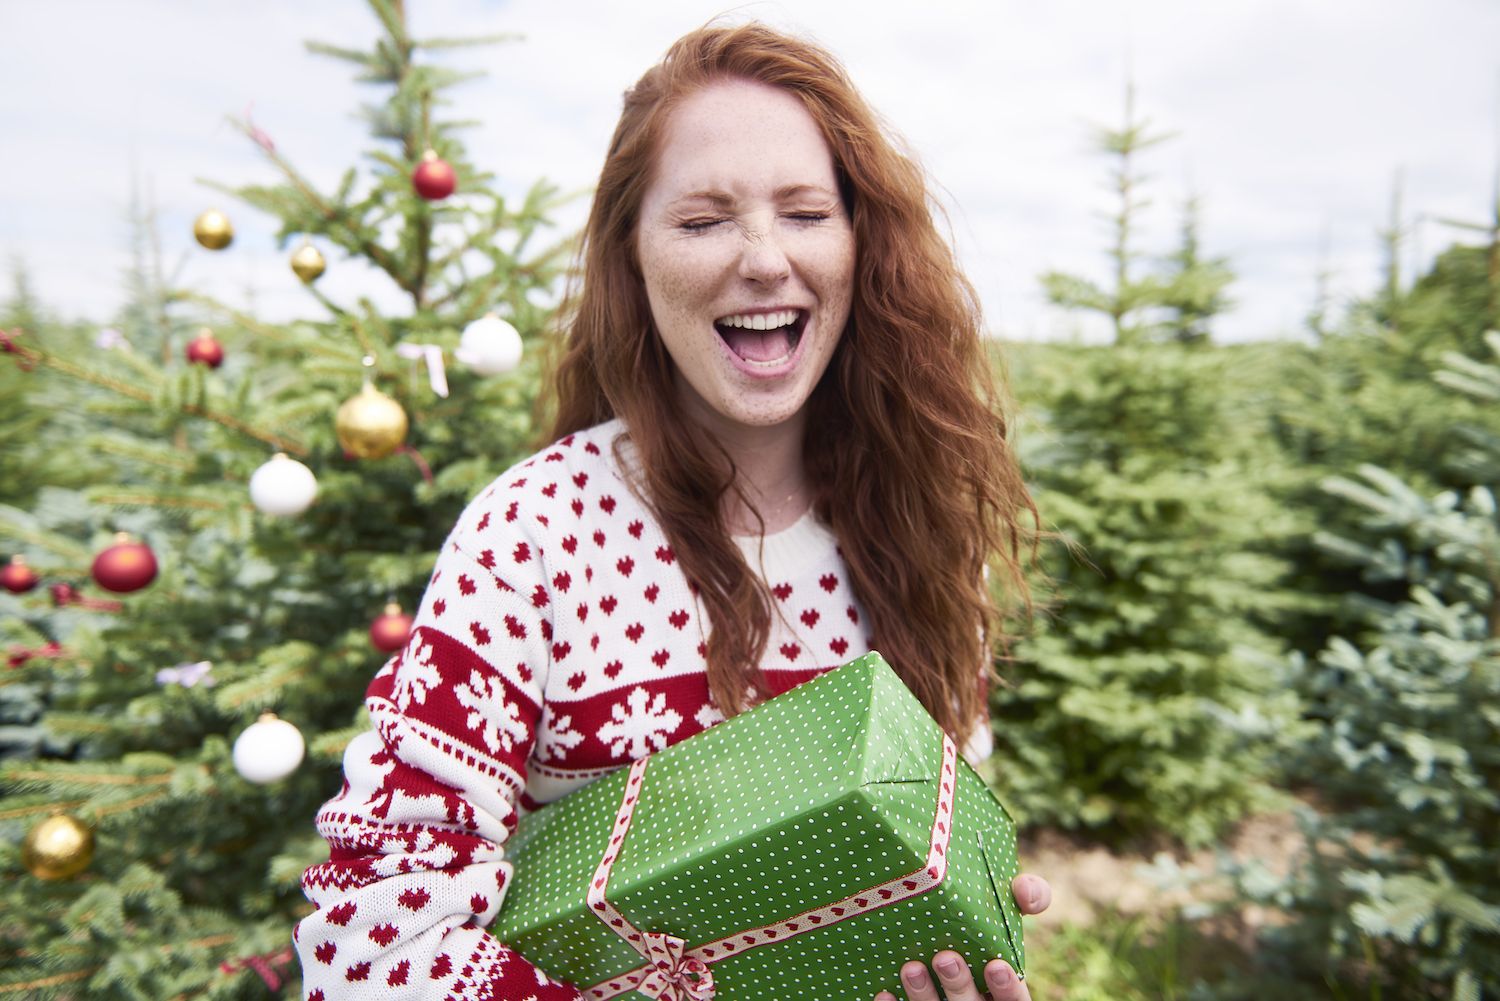 IrishCentral has launched a brand new Christmas Shop this gift giving season 